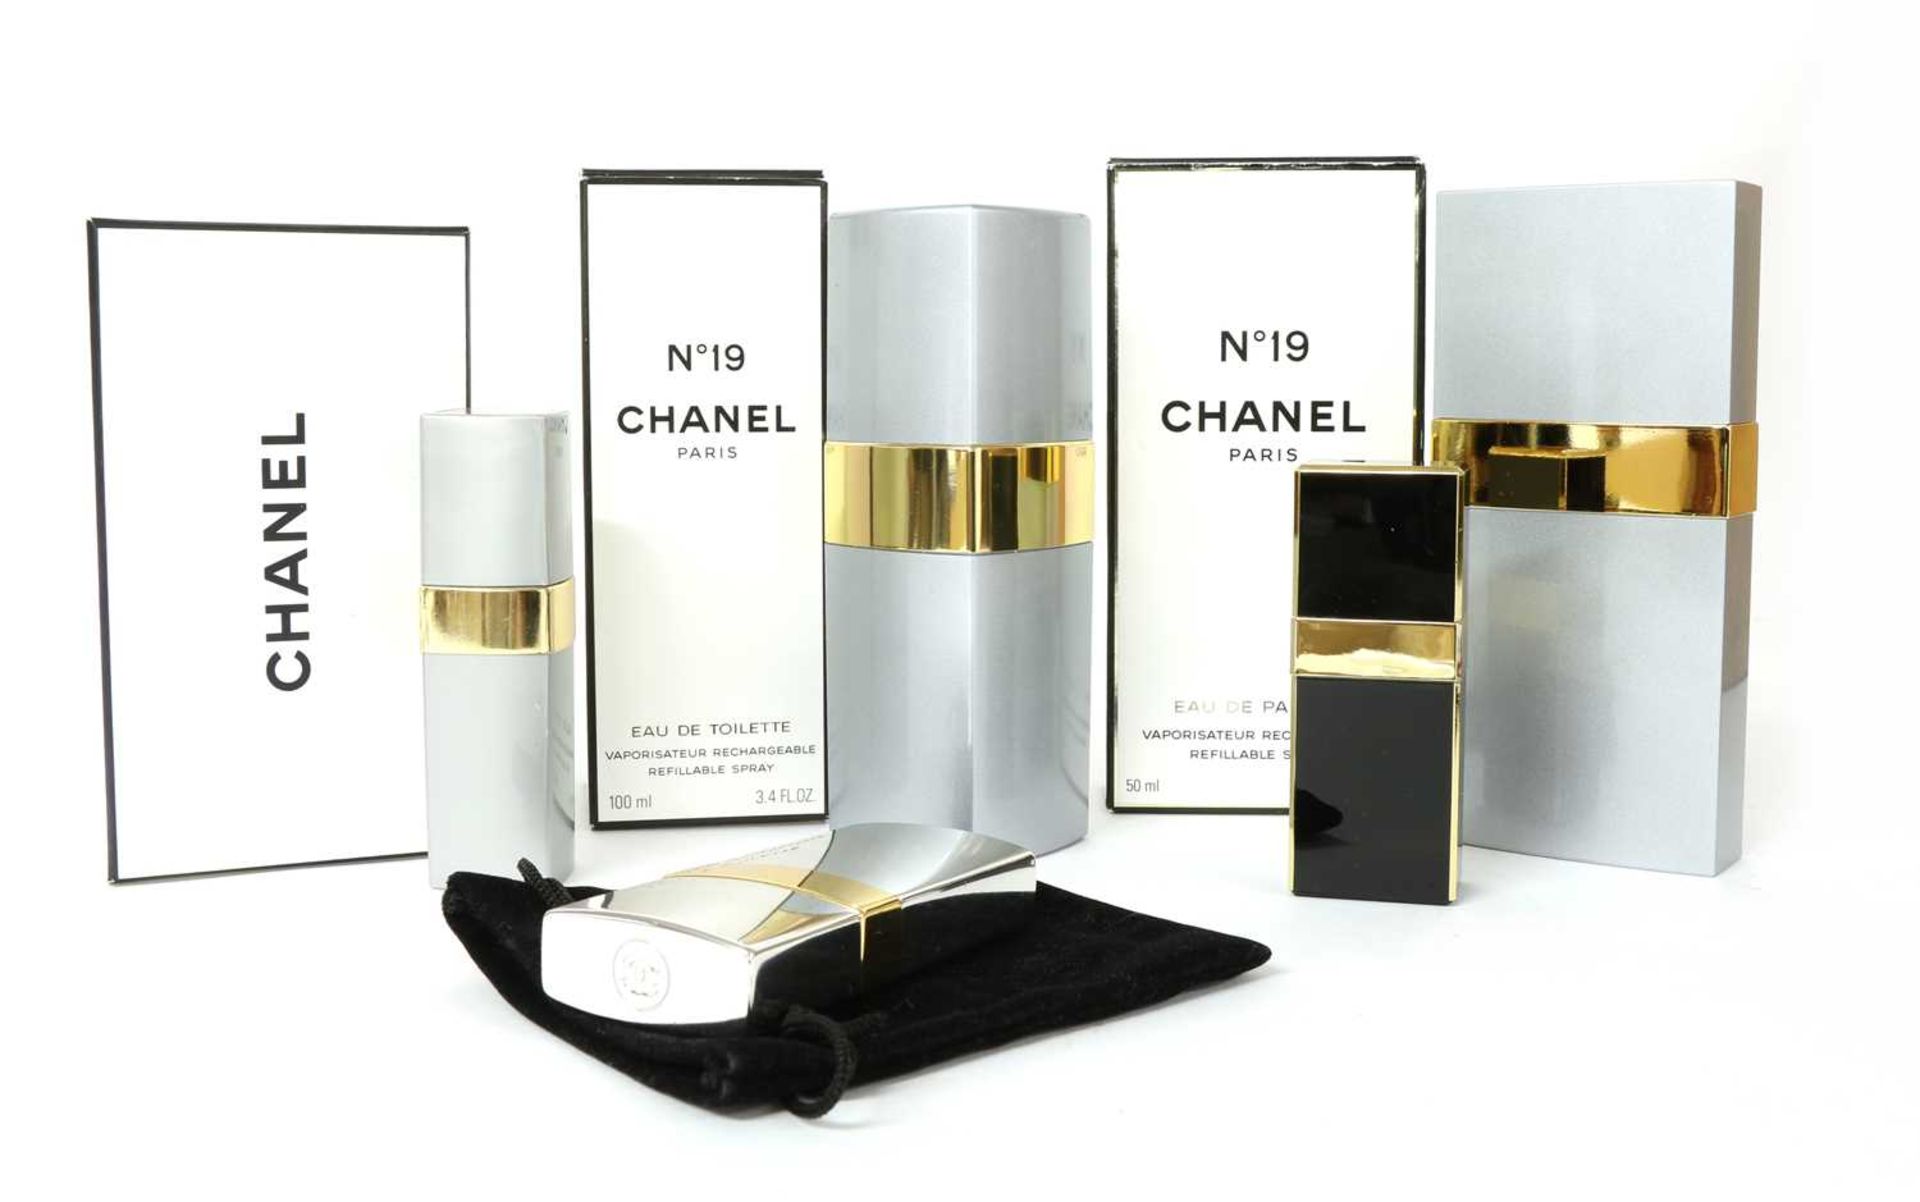 Five Chanel fragrance cases